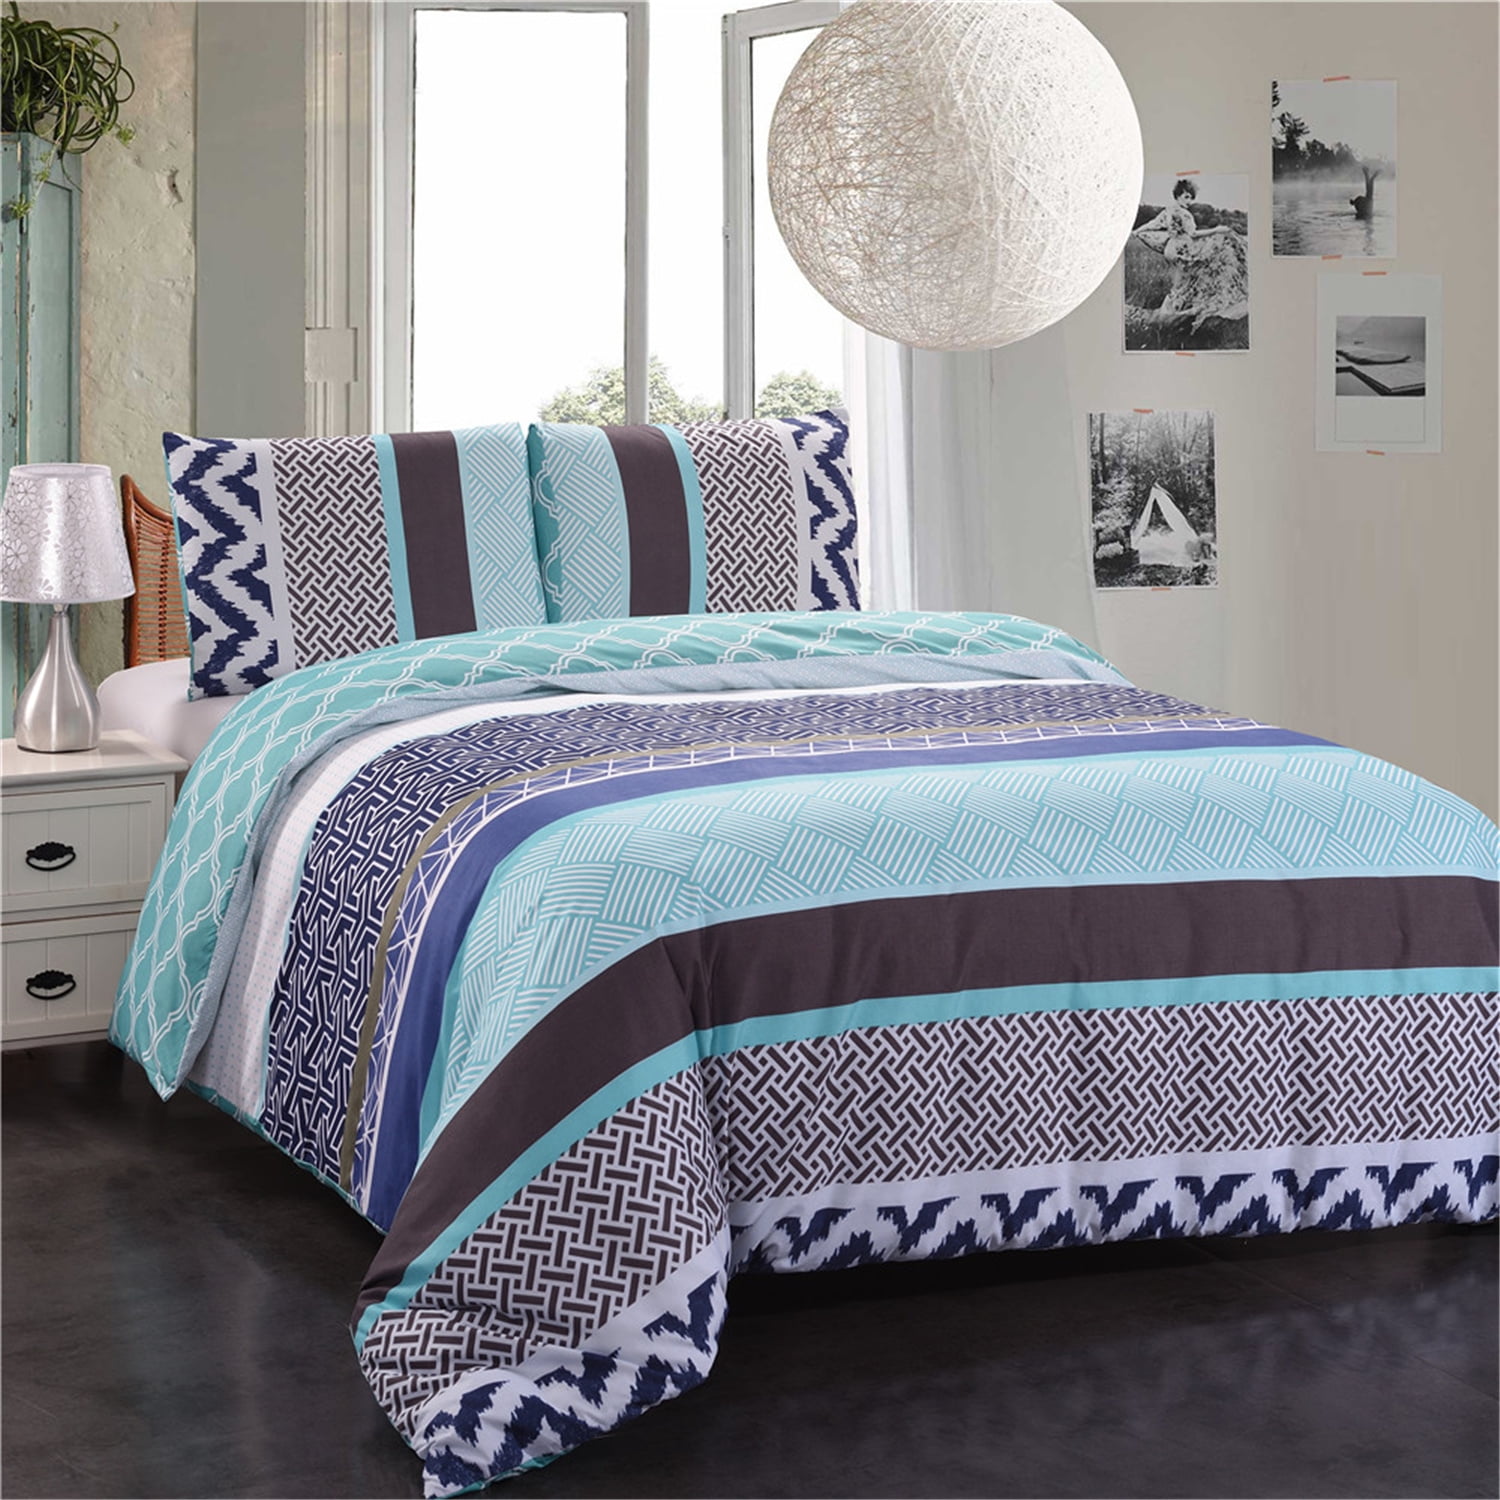 Details about   PLAIN DYED Quilt DUVET COVER Easy Care Bedding Set Soft Fitted Sheet Pillow Case 